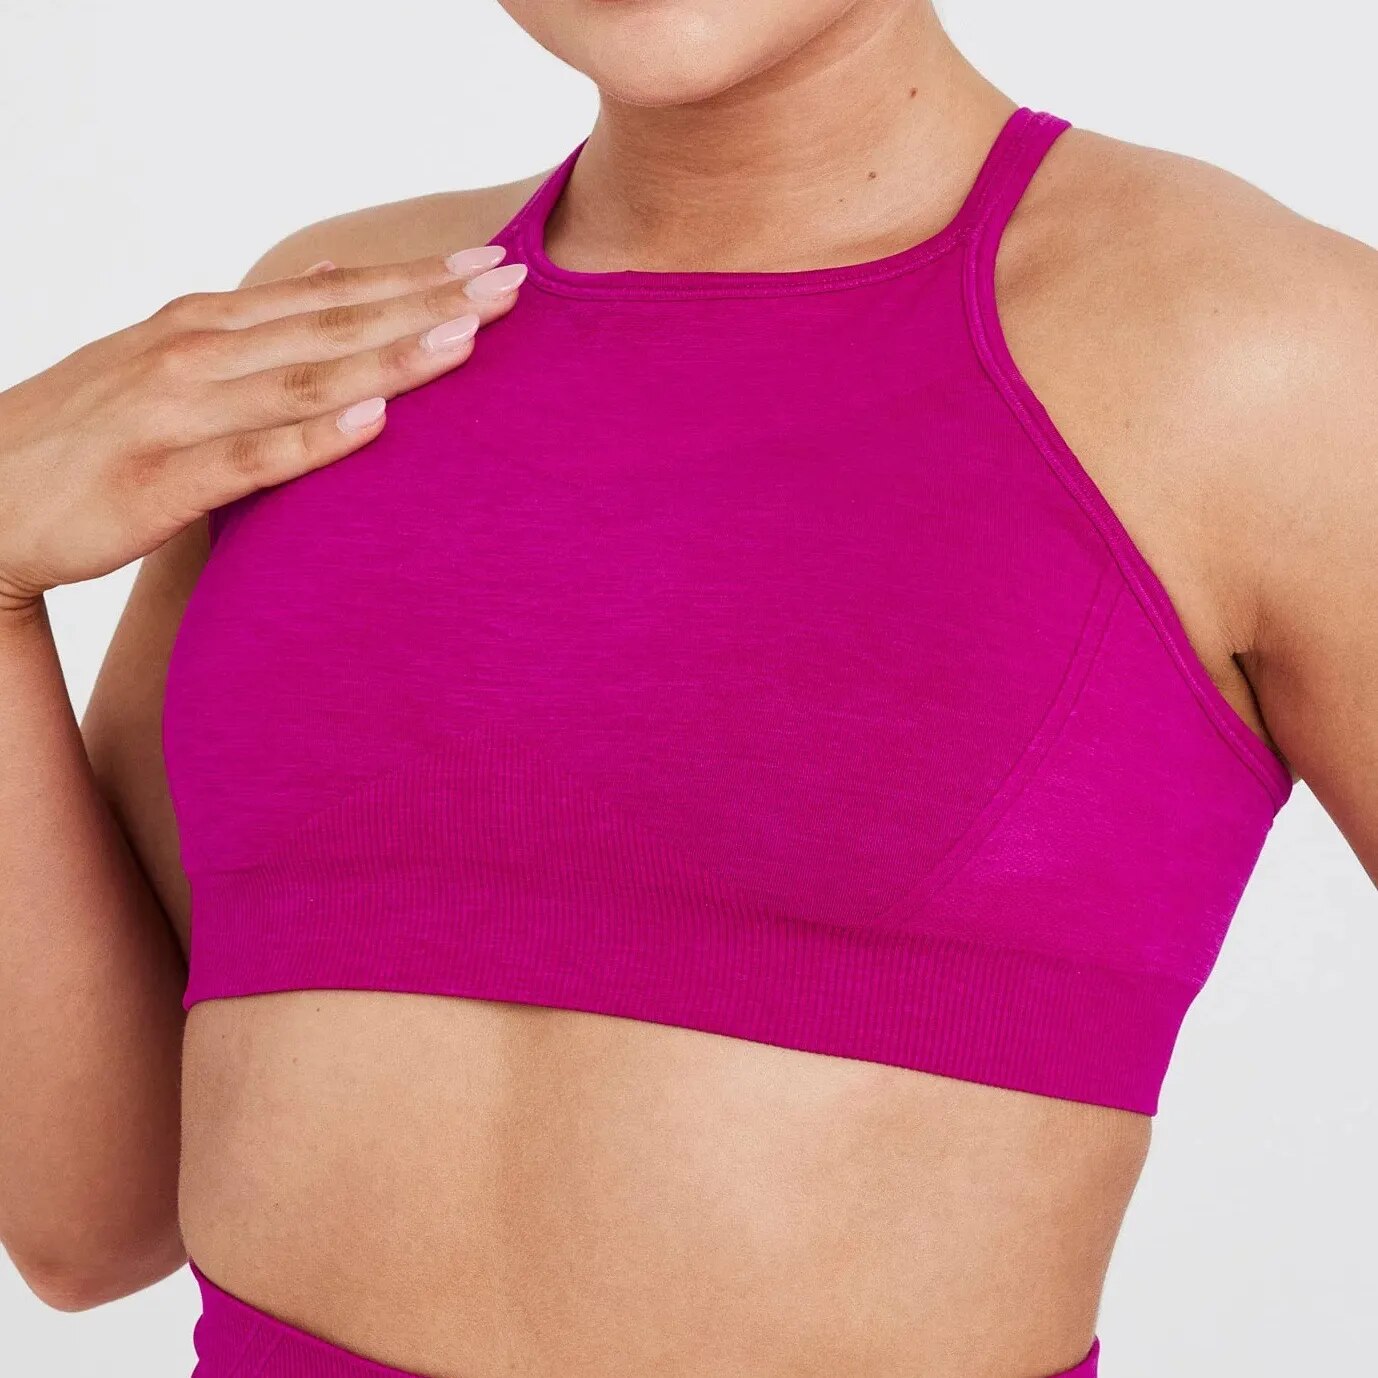 High Neck Sports Bra: Experience maximum support in athletic fashion. High-performance nylon/spandex blend for comfort, flexibility, and durability. Breathable design and quick-dry technology for a cool and confident workout. Seamless comfort with a friction-minimizing design for high-intensity workouts.